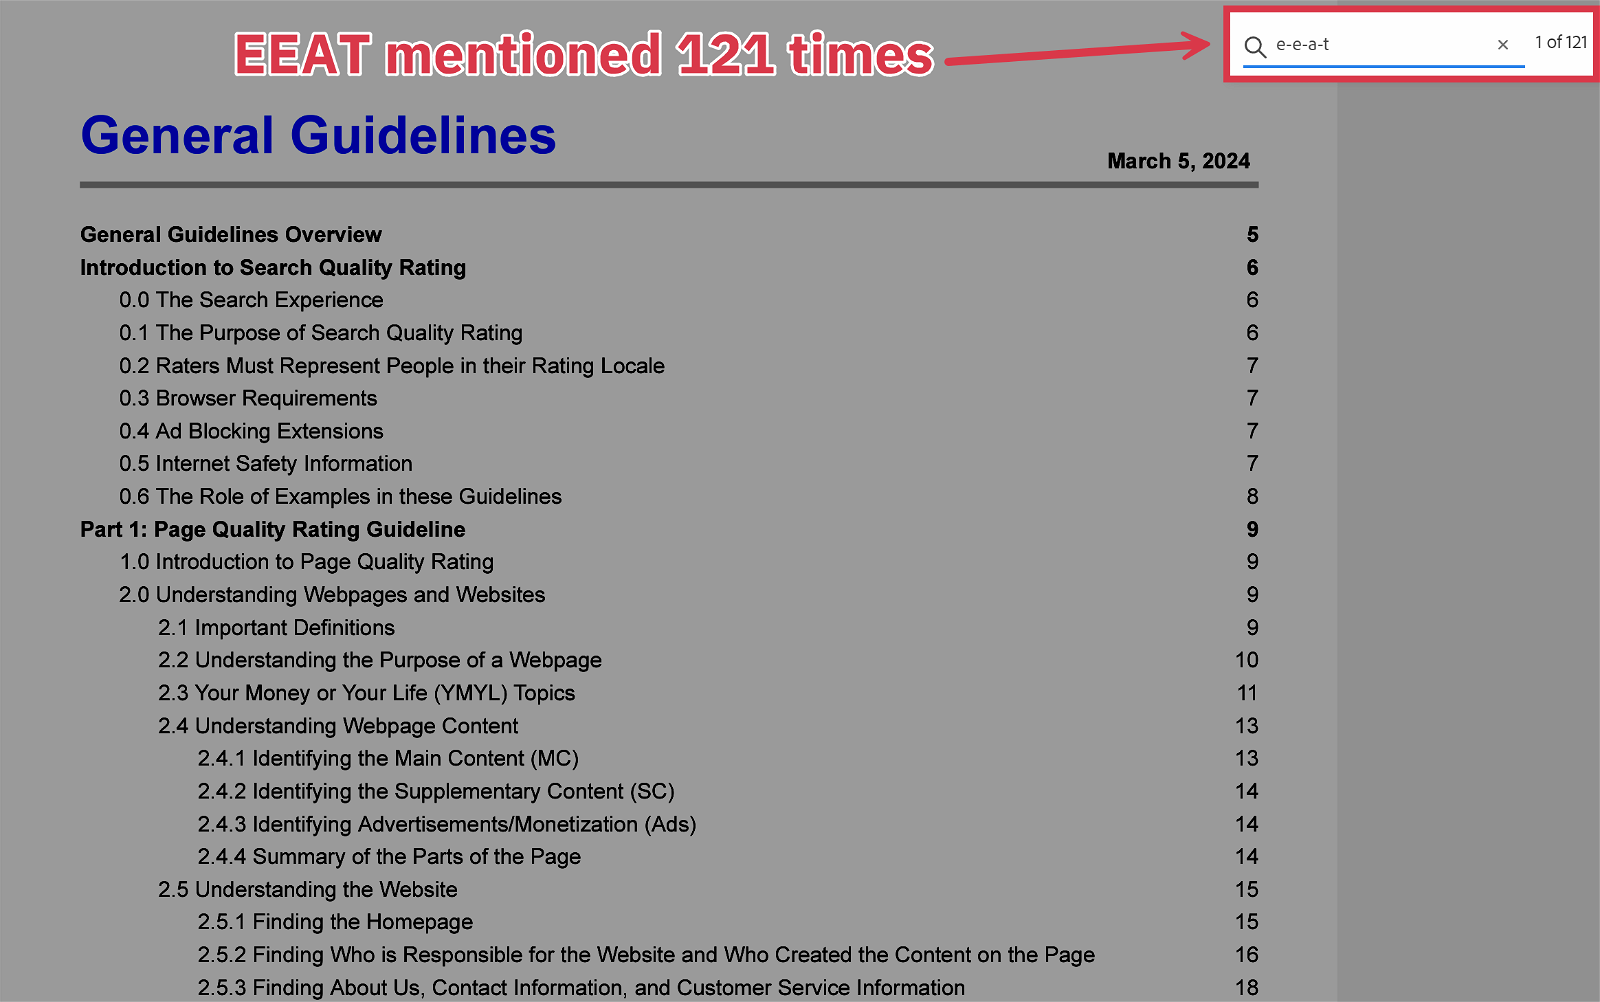 Search Rater Guidelines EEAT Mentions